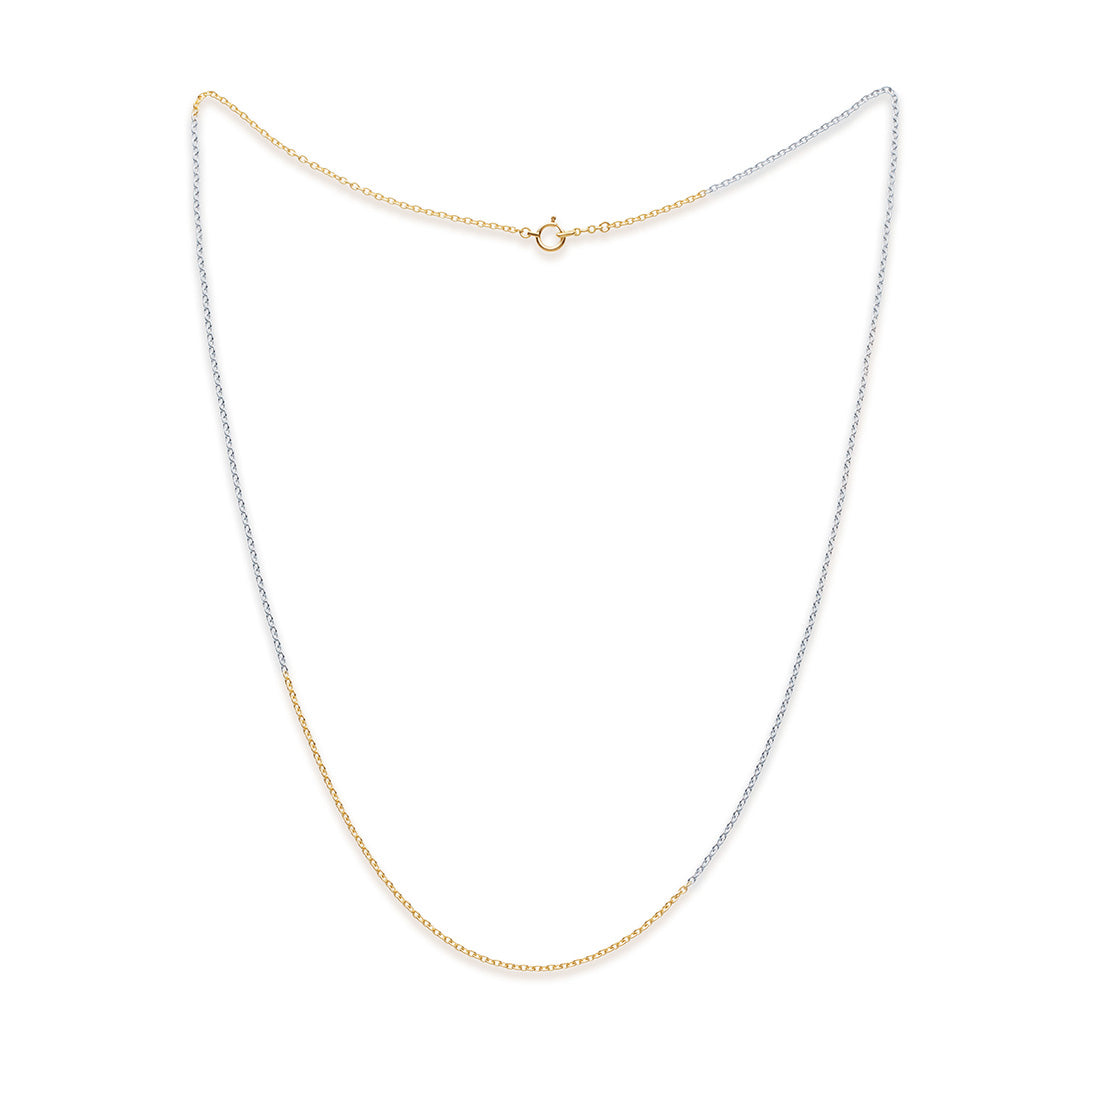 18K　Oval Chain　オーバルチェーン　Combination　コンビネーション　Necklace　ネックレス　1.6mm